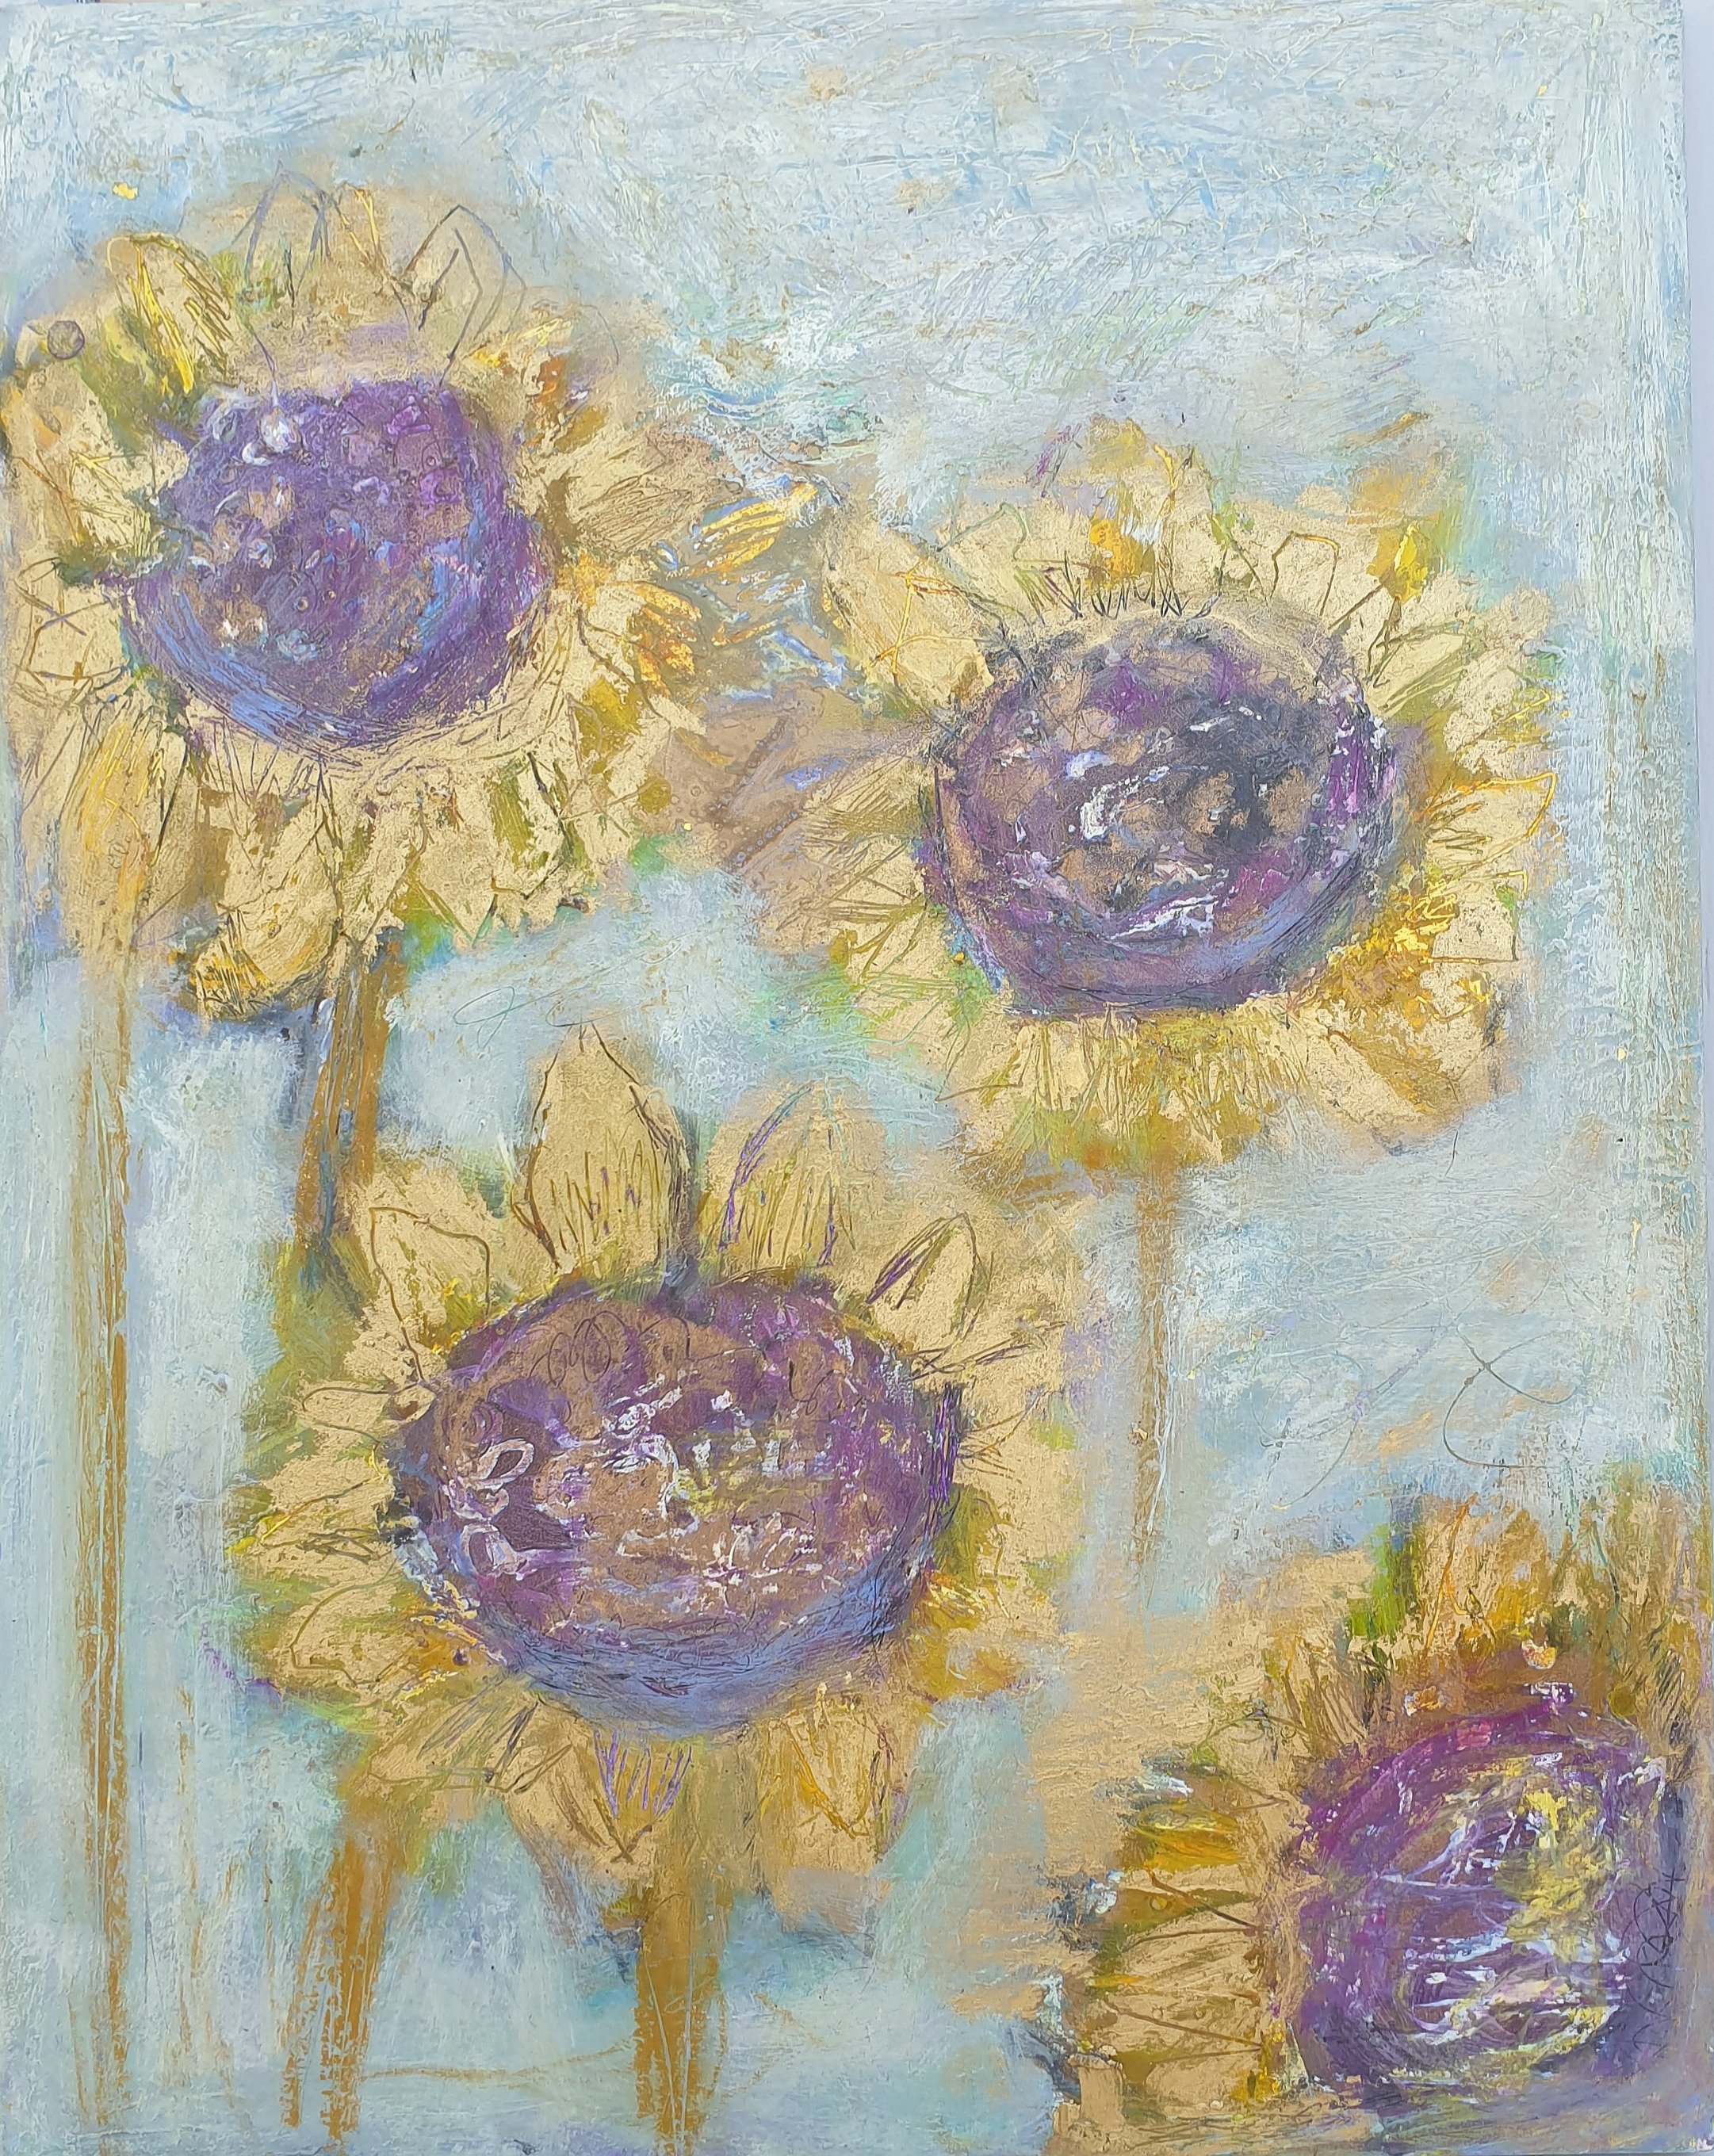 Sunflowers 1 sold